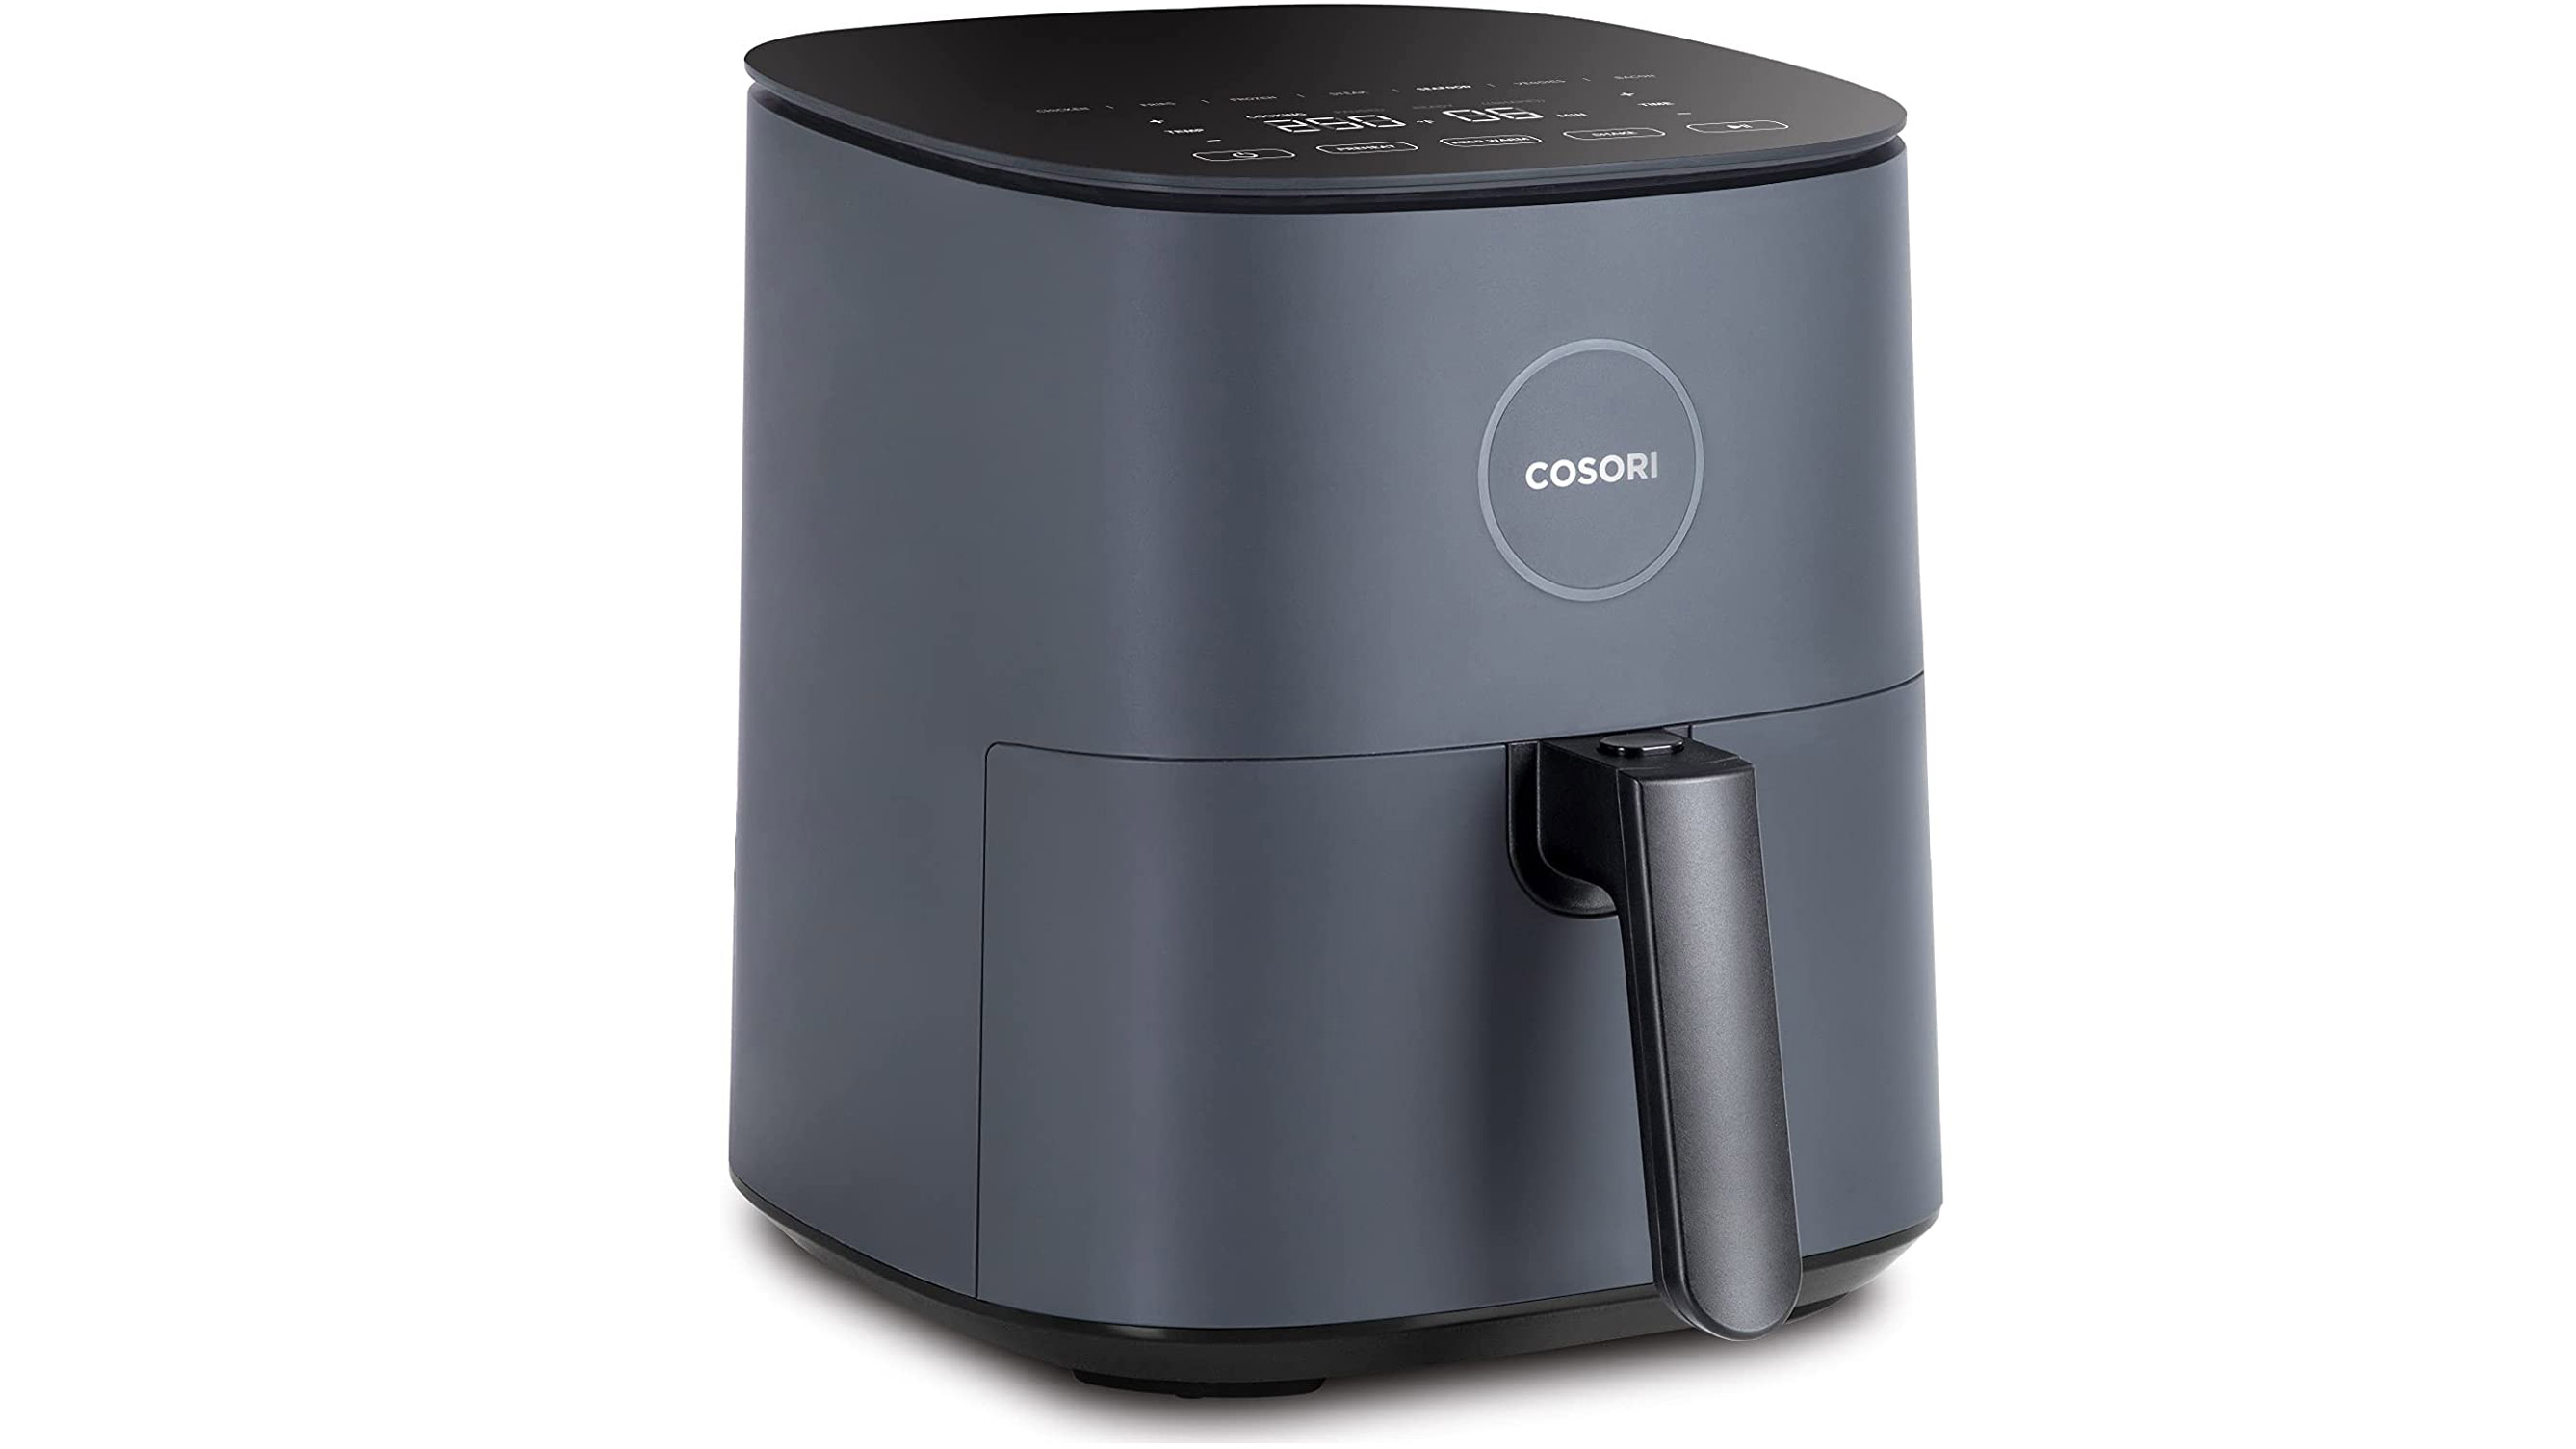 Charotar Globe Daily Cosori Pro LE Air Fryer L501 on a white background